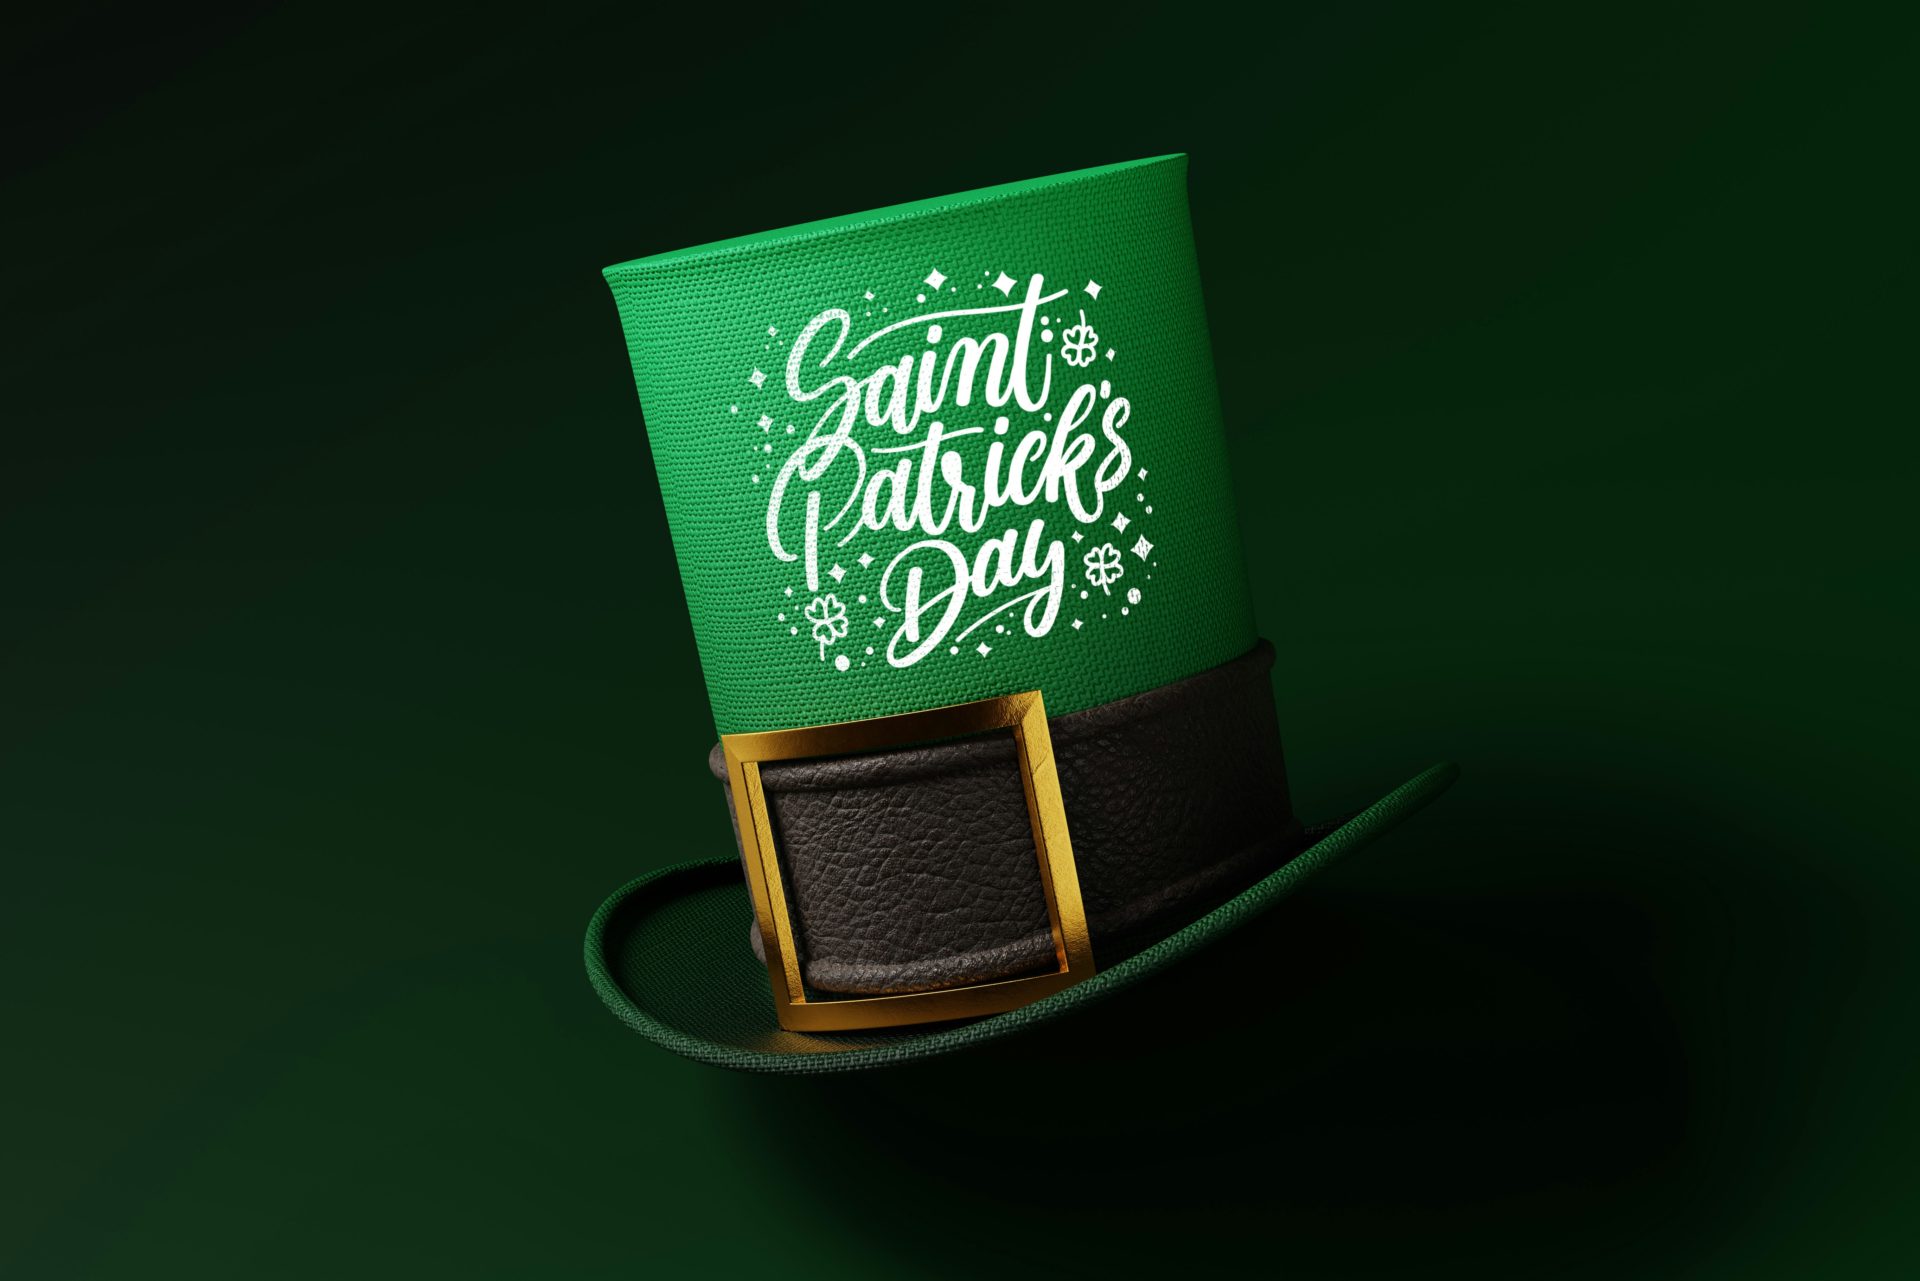 Saint Patrick's Day in Brussels: Let's celebrate Luck and Joy! 🍀✨